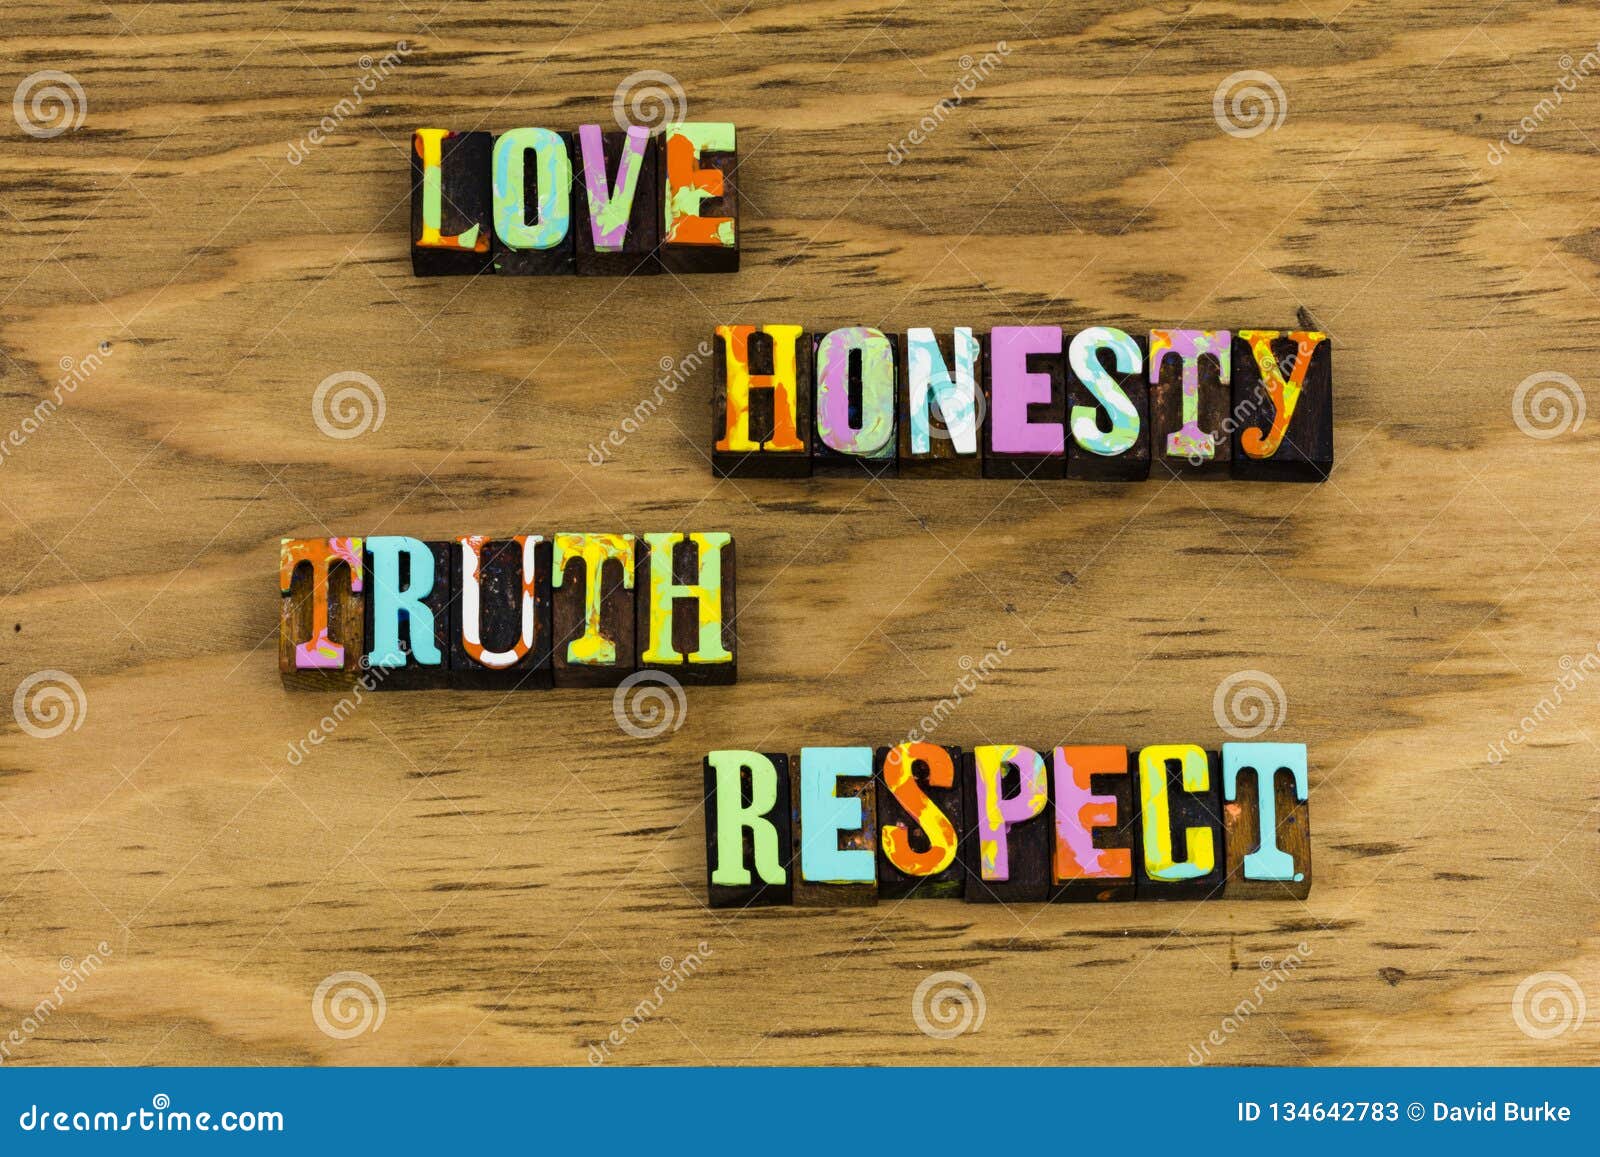 Love Honesty Truth Respect Trust Stock Image Image Of Letter Quote